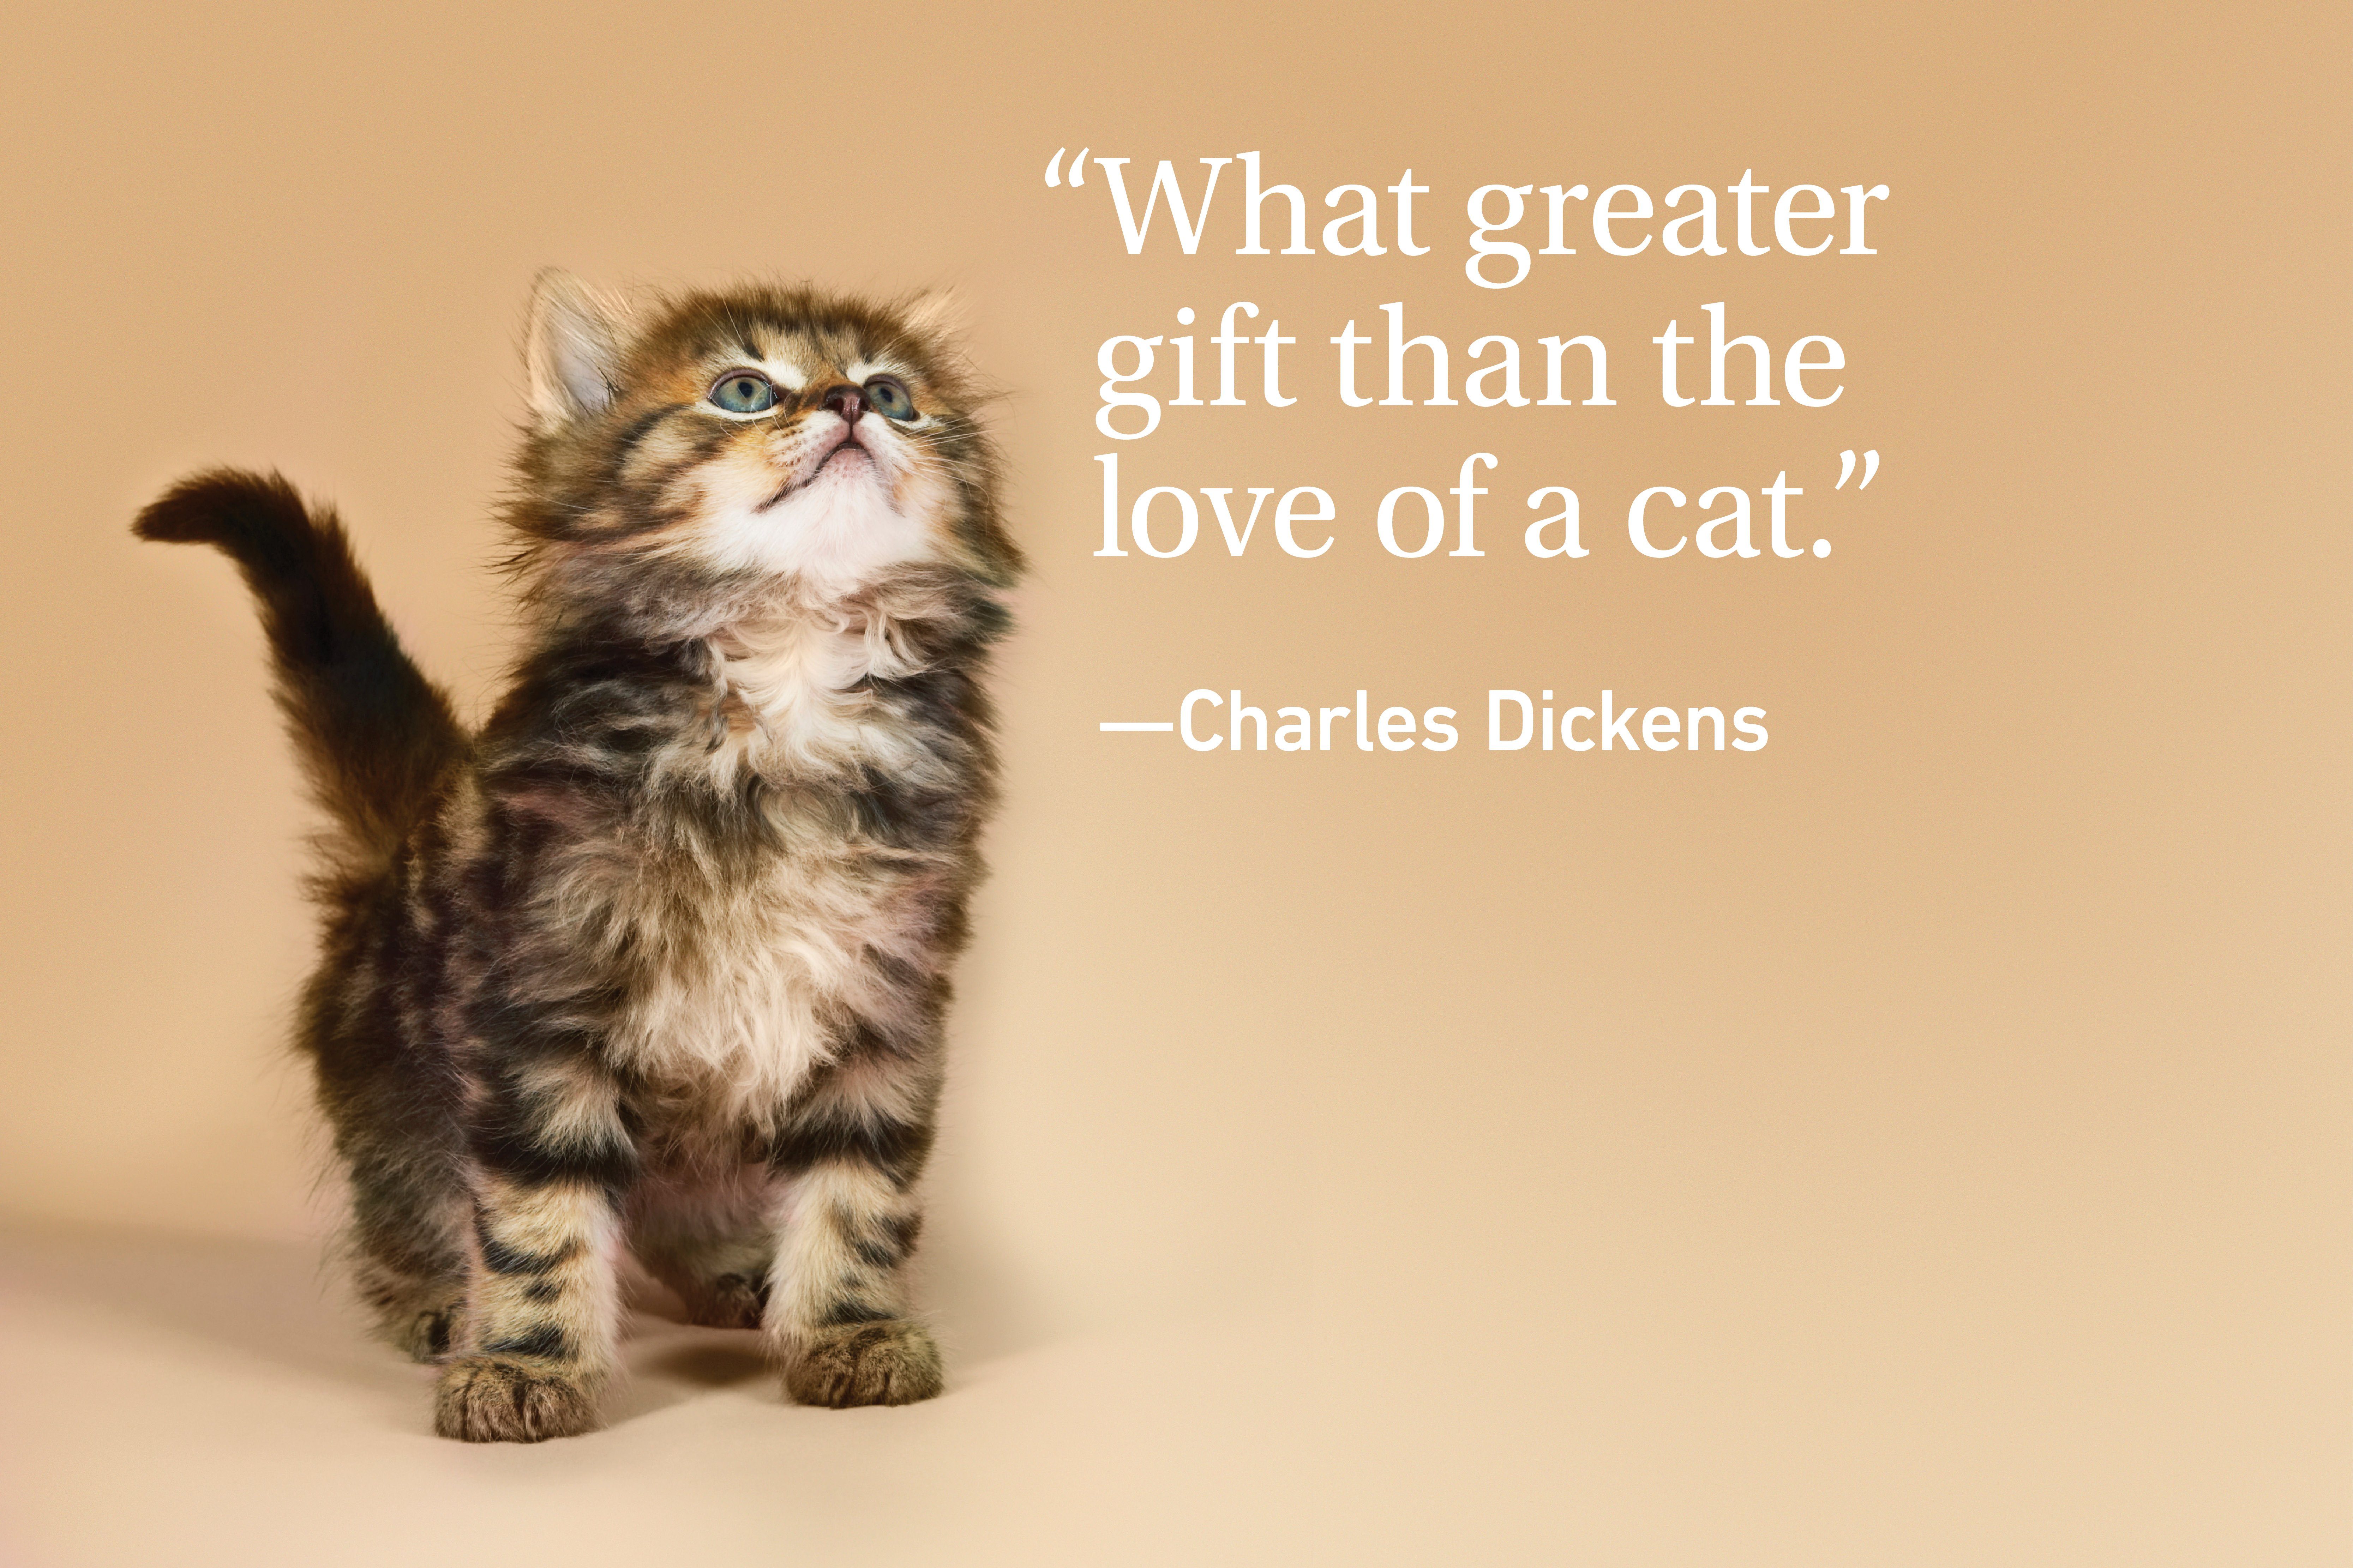 Kitten on orange background with a quote